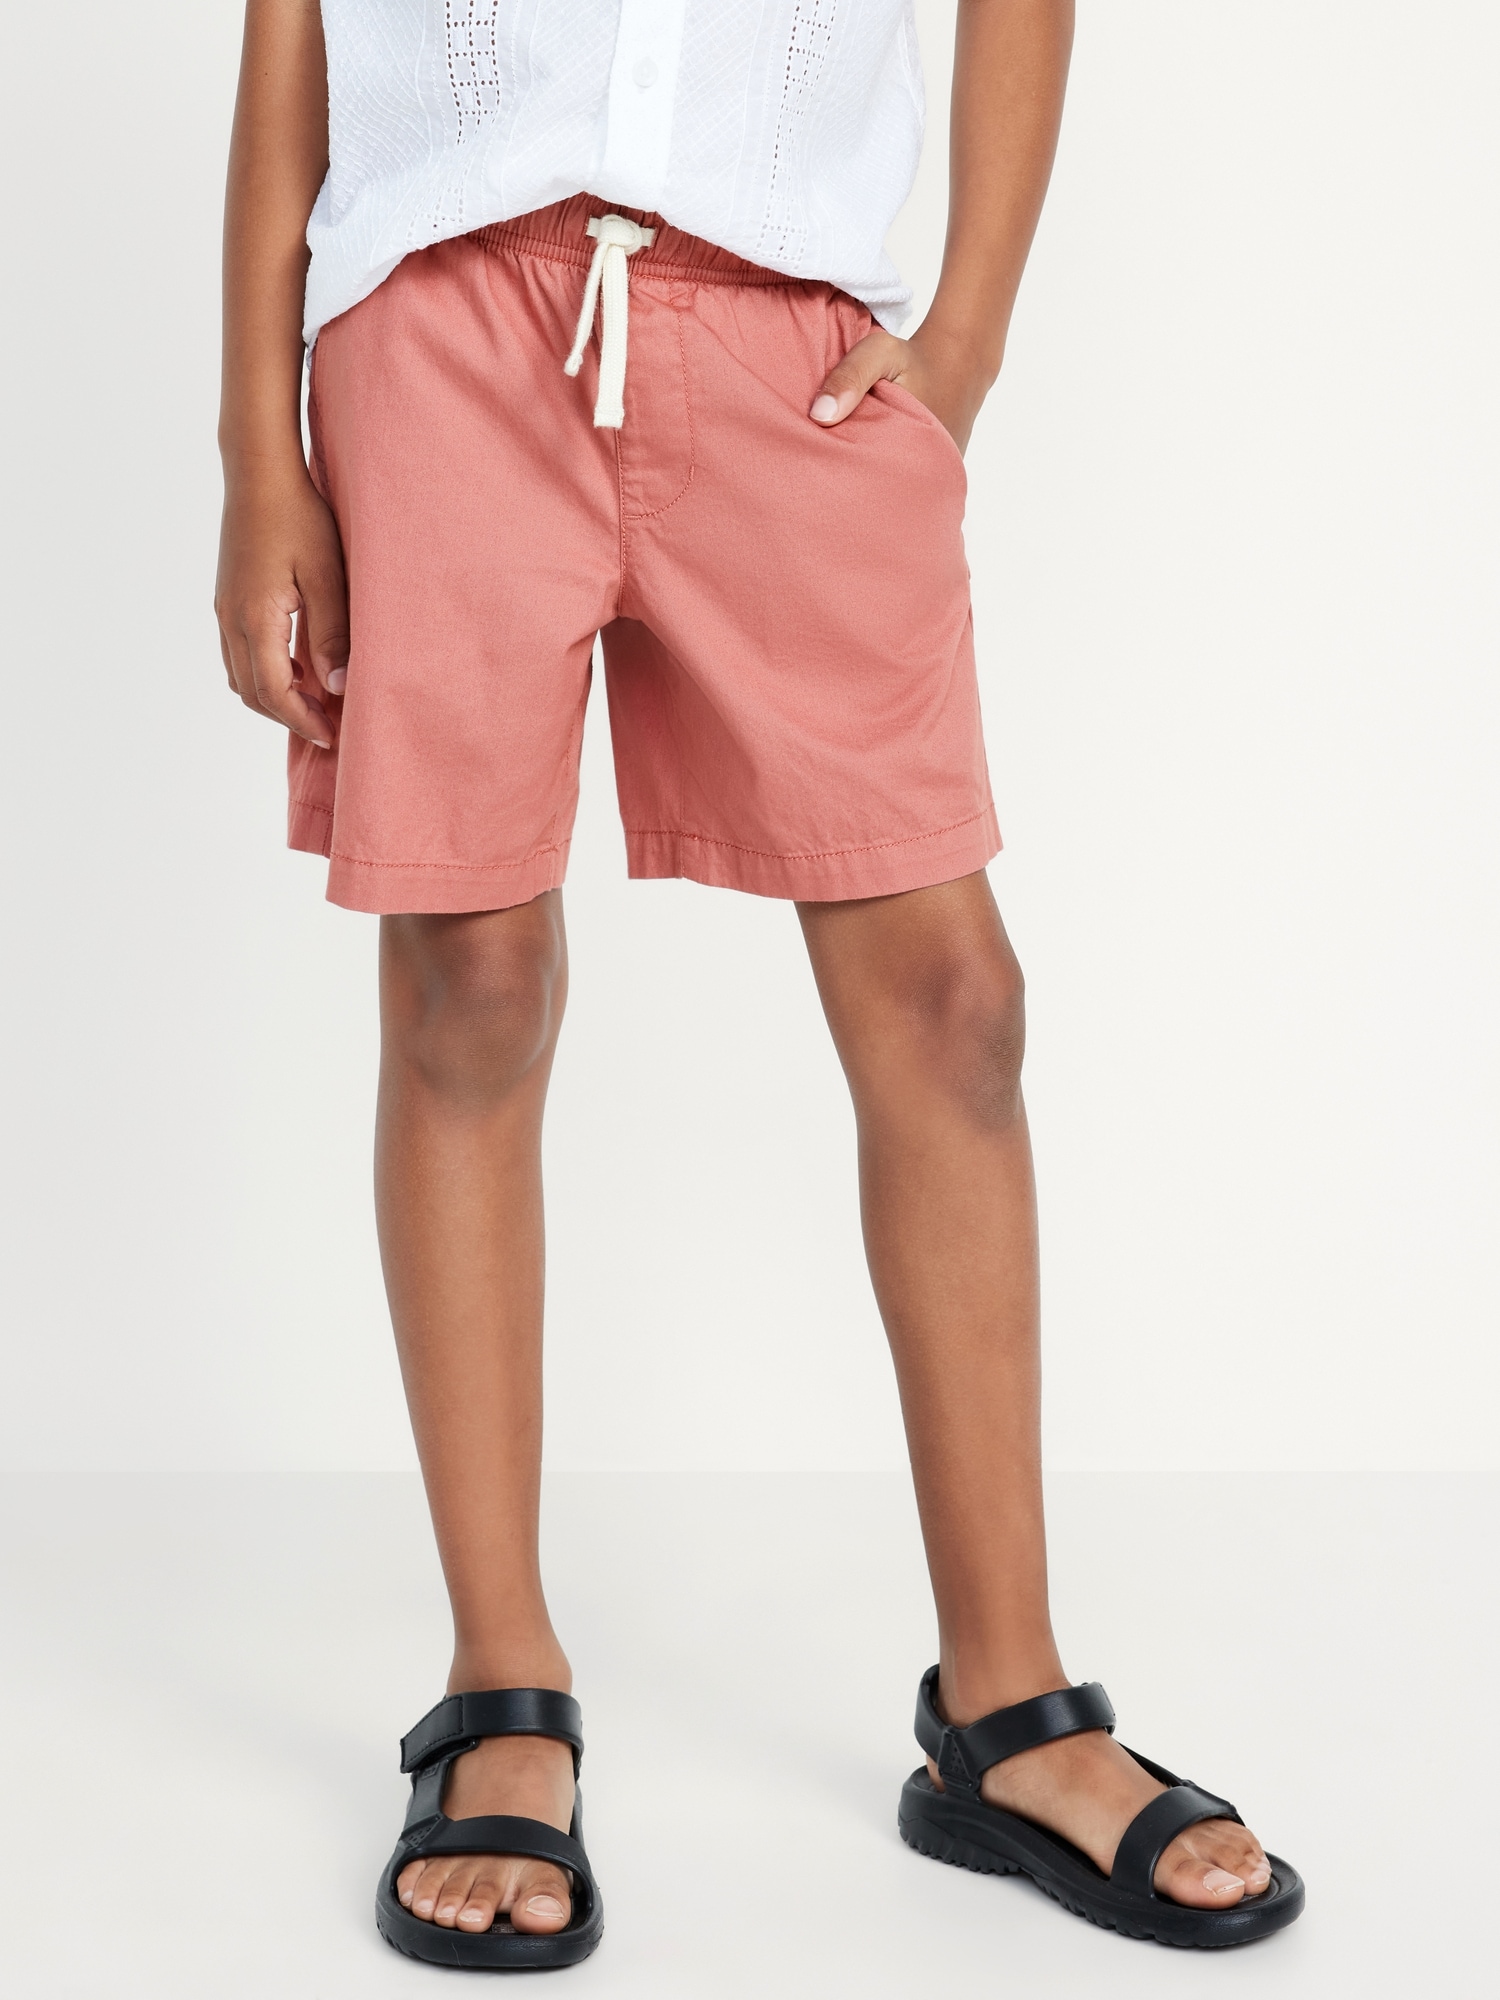 Above Knee Twill Pull-On Shorts for Boys